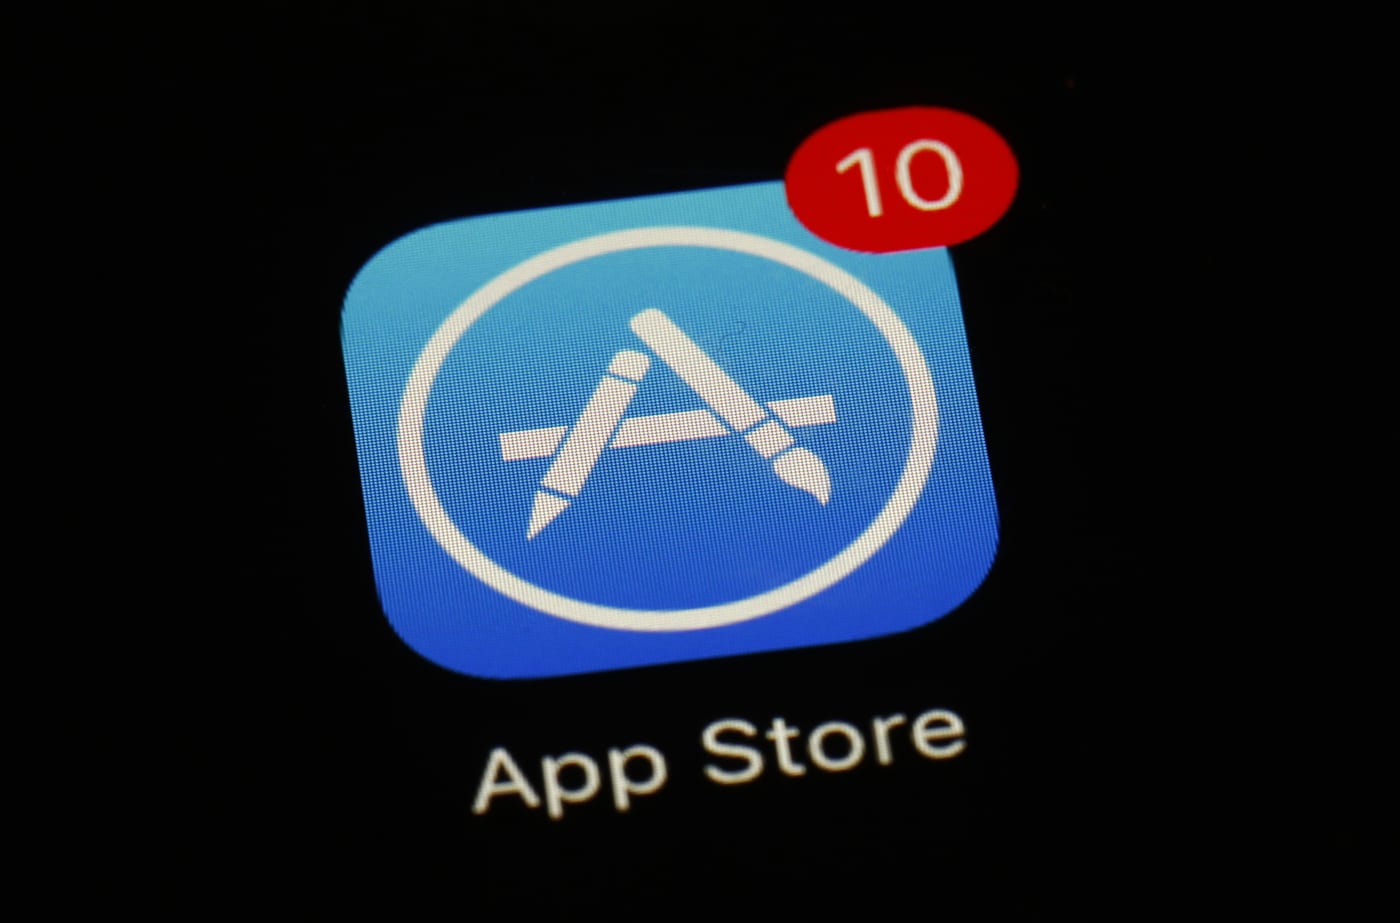 Apple details how third-party app stores and payments will work in Europe